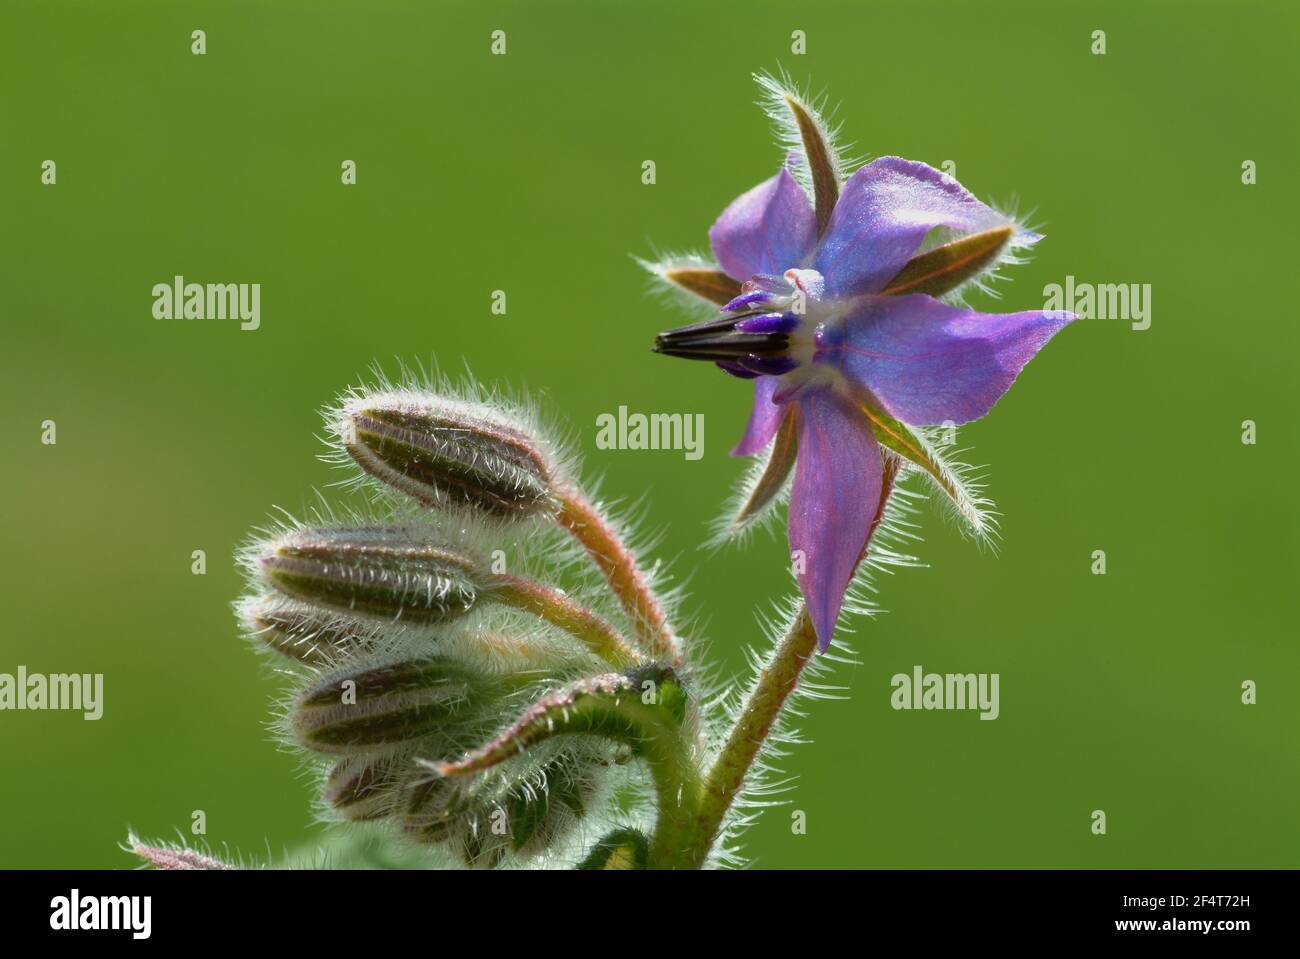 Borage, Borago officinalis, cucumber herb, a plant belonging to the broadleaf family, used as a spice and medicinal plant  /  Borretsch, Borago offici Stock Photo